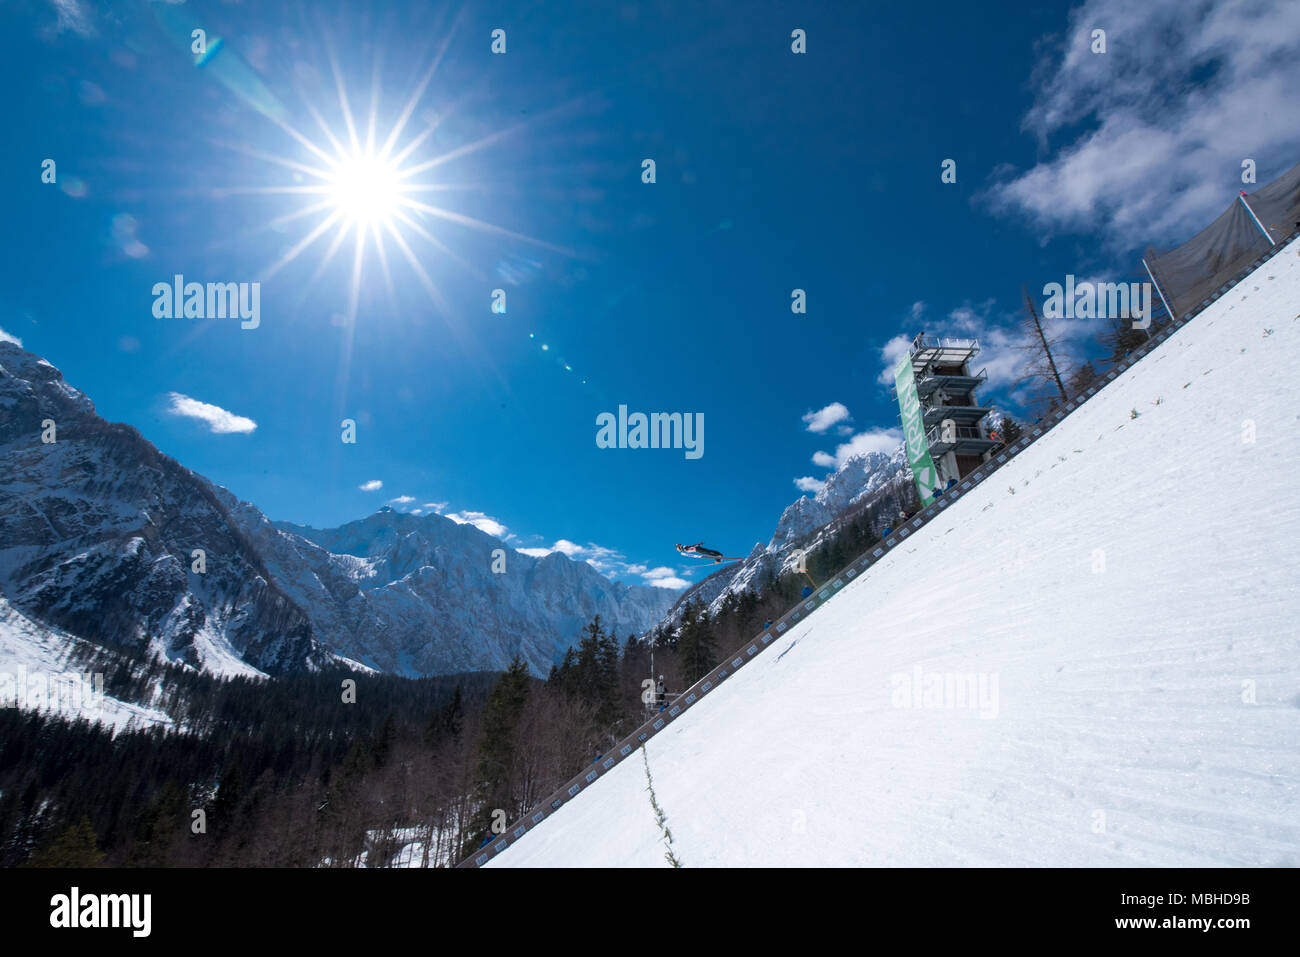 PLANICA, SLOVENIA - MARCH 24 2018 : Fis World Cup Ski Jumping Final - Hill and sun Stock Photo